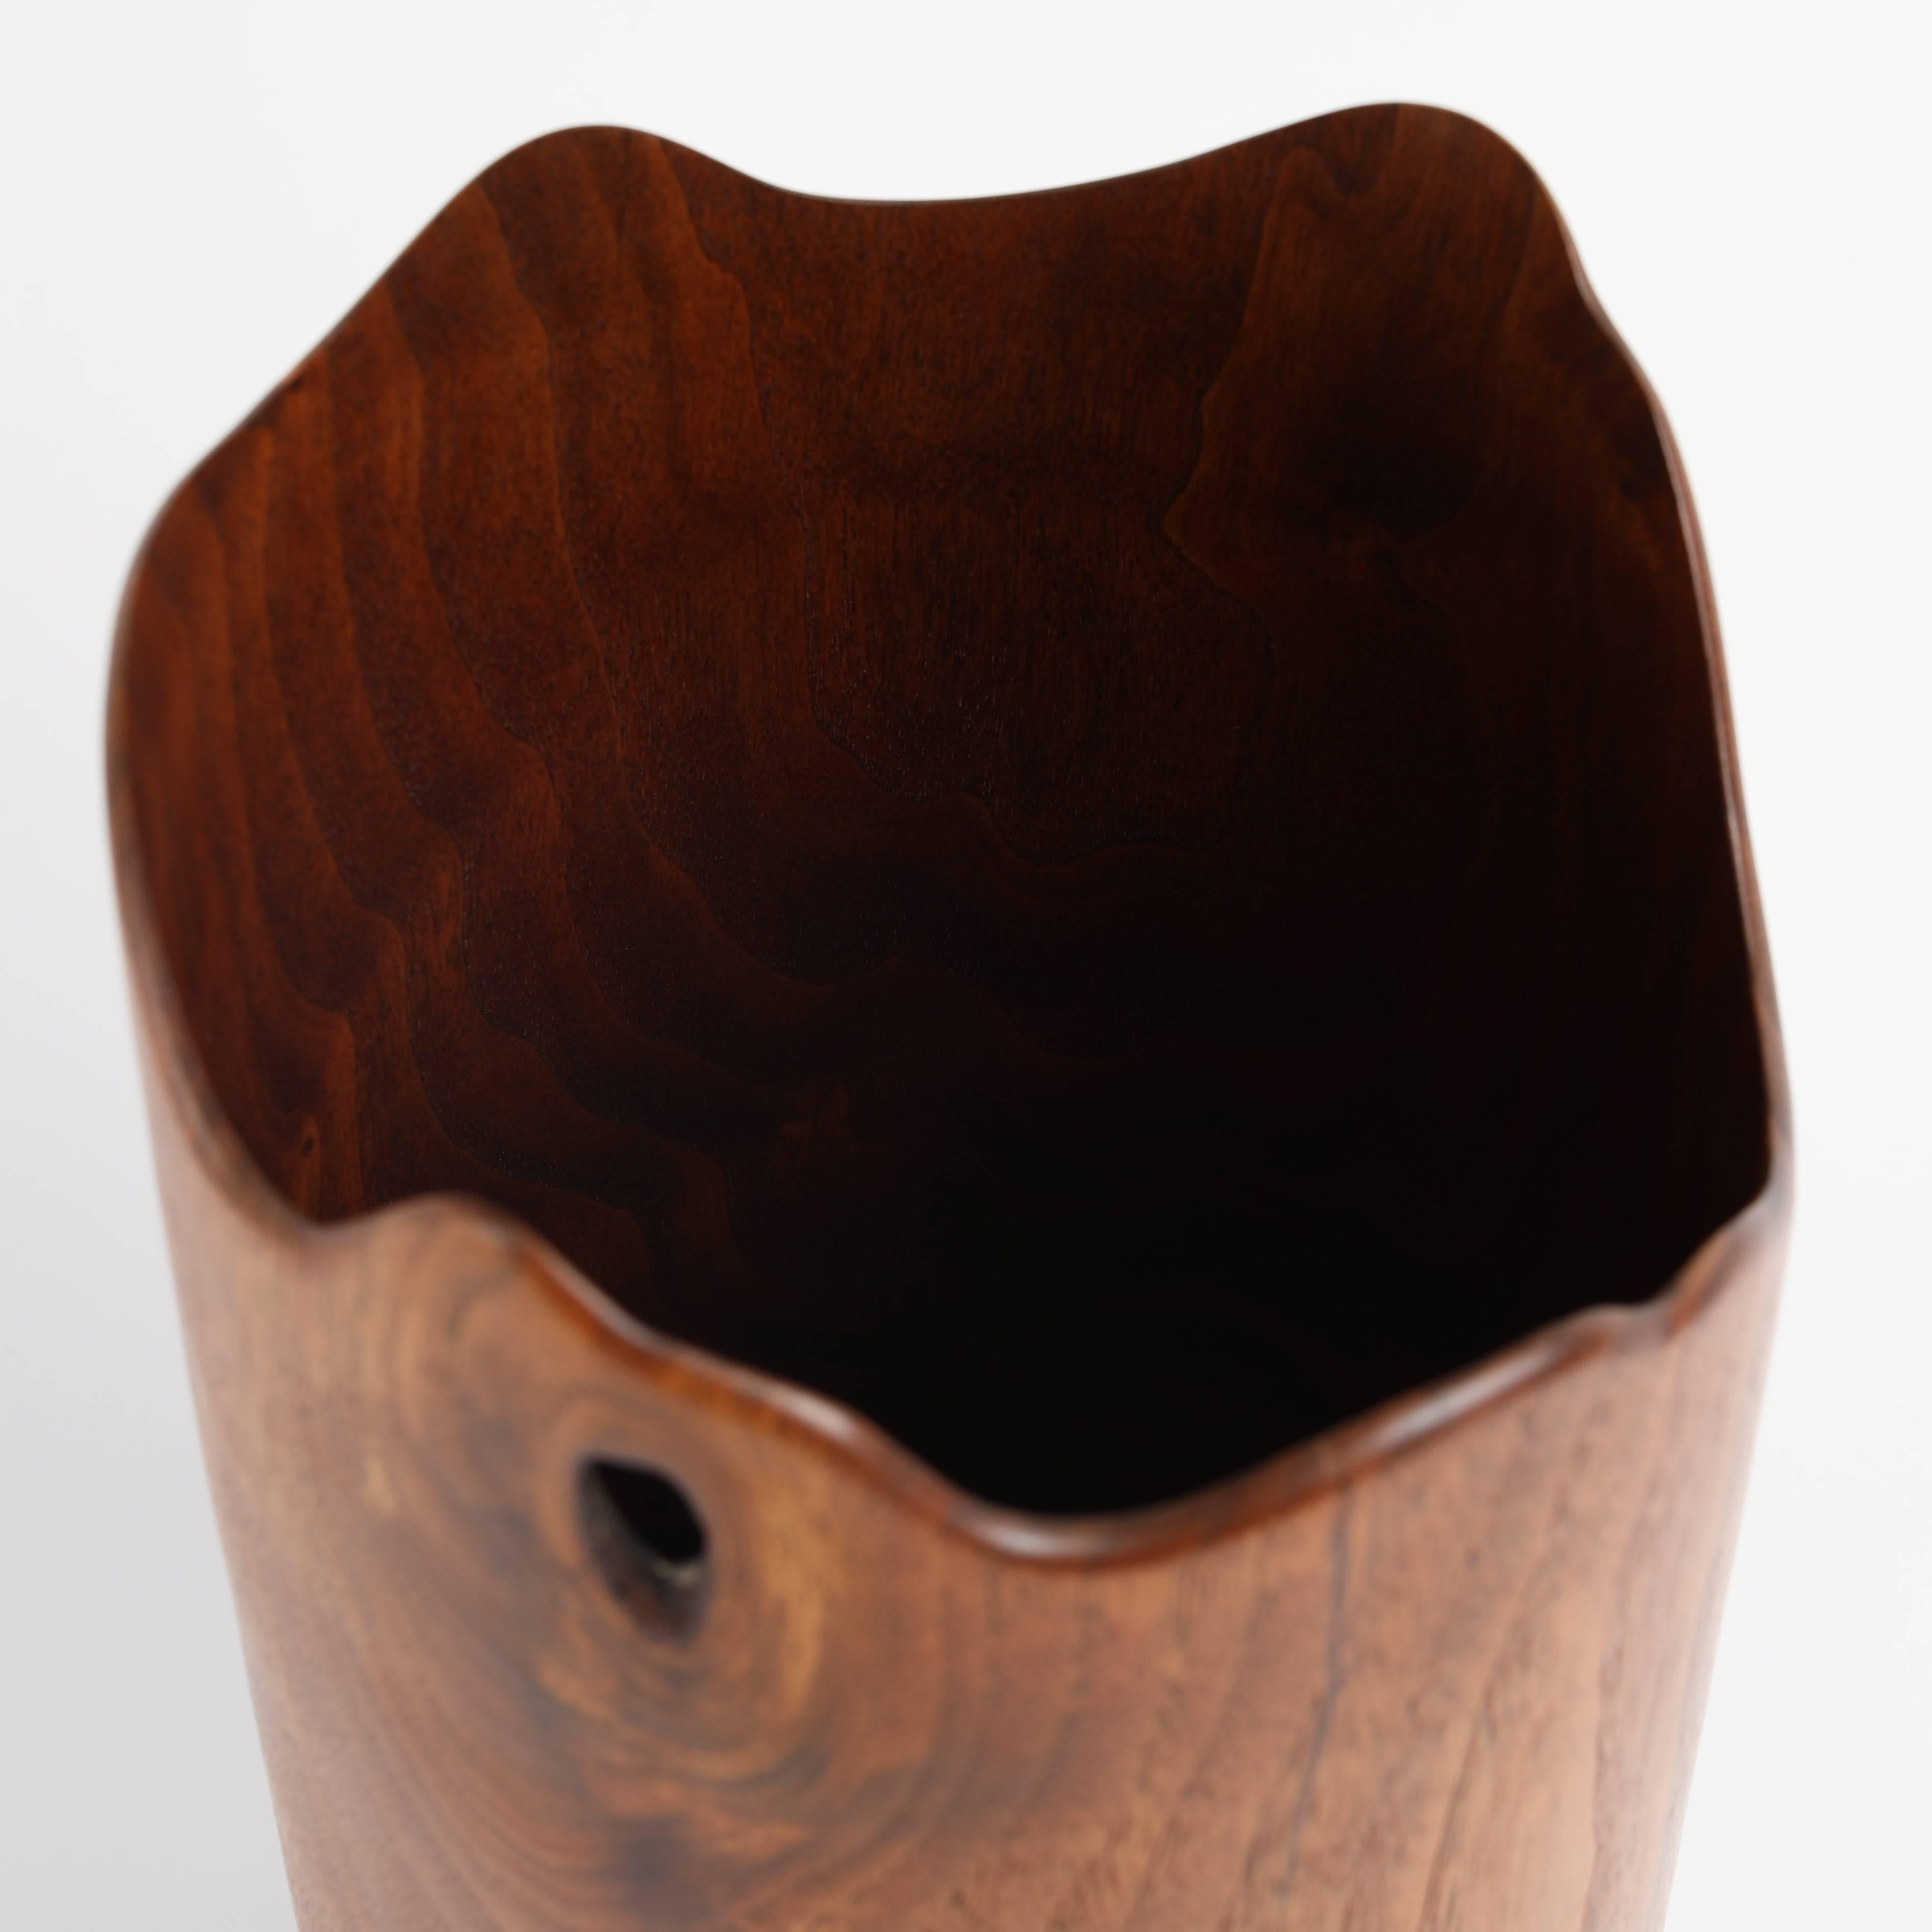 Turned Walnut Vase with Free-Form Top by Mike Kornblum 1